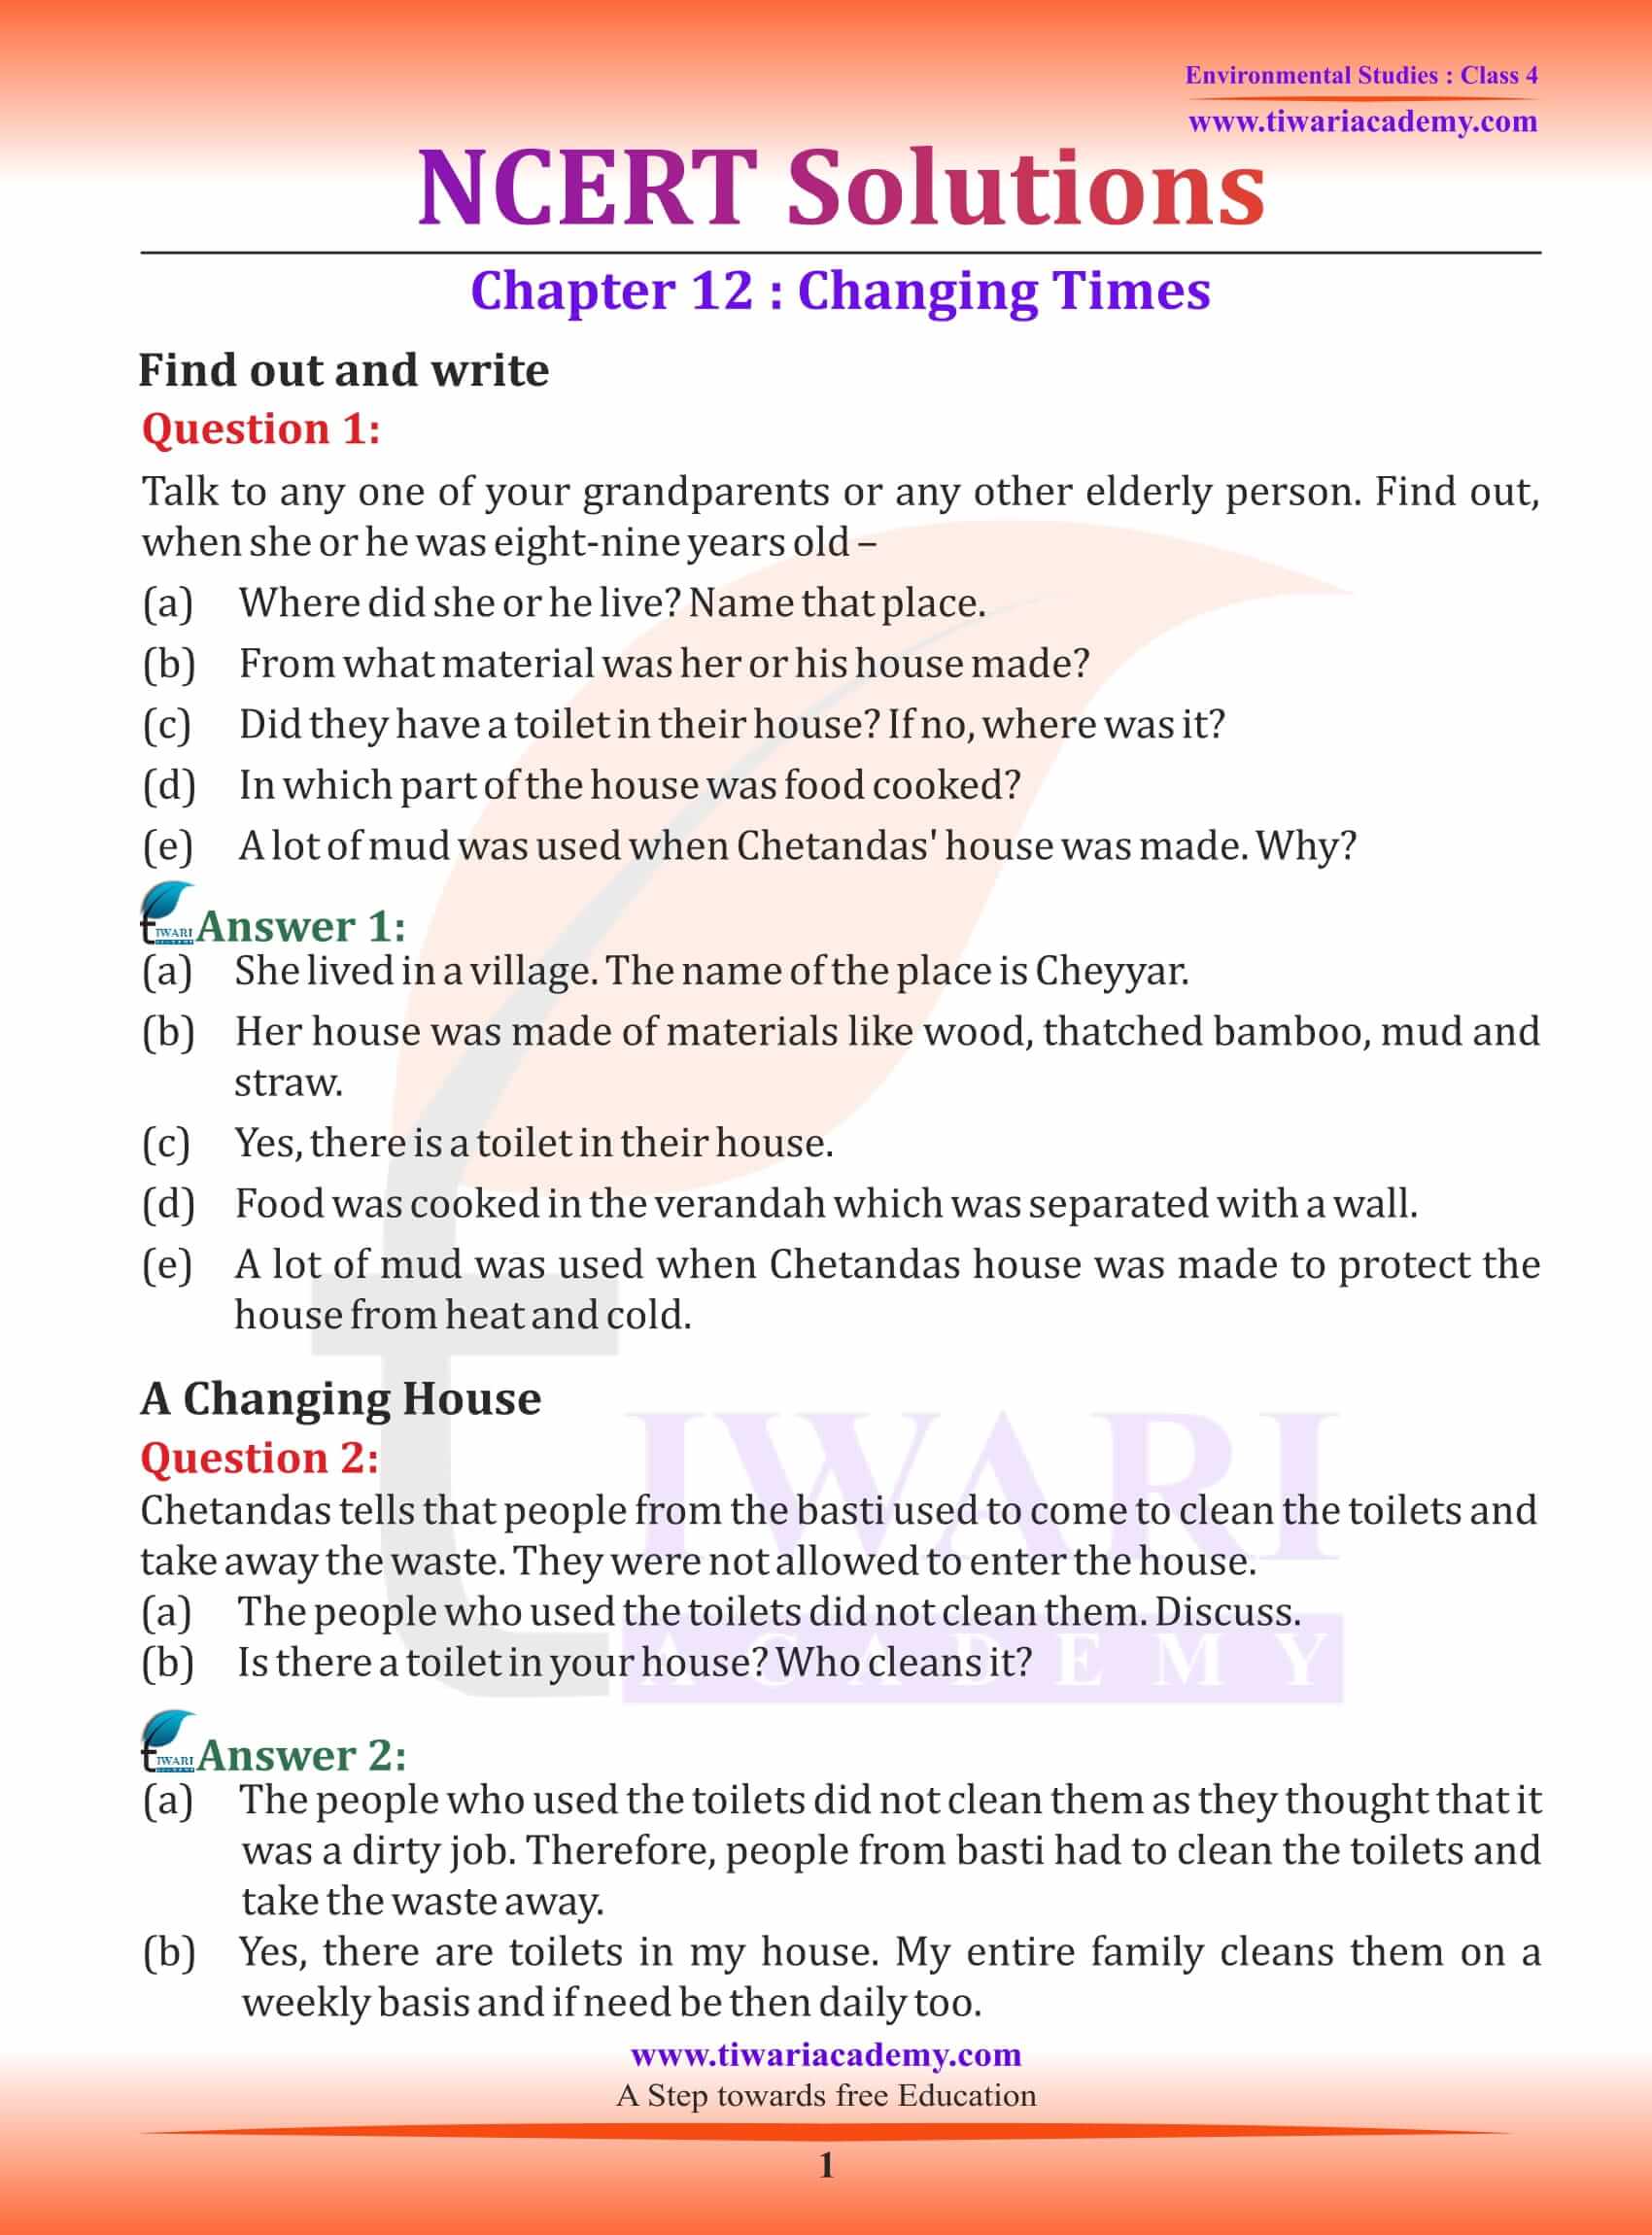 NCERT Solutions for Class 4 EVS Chapter 12 Changing Times